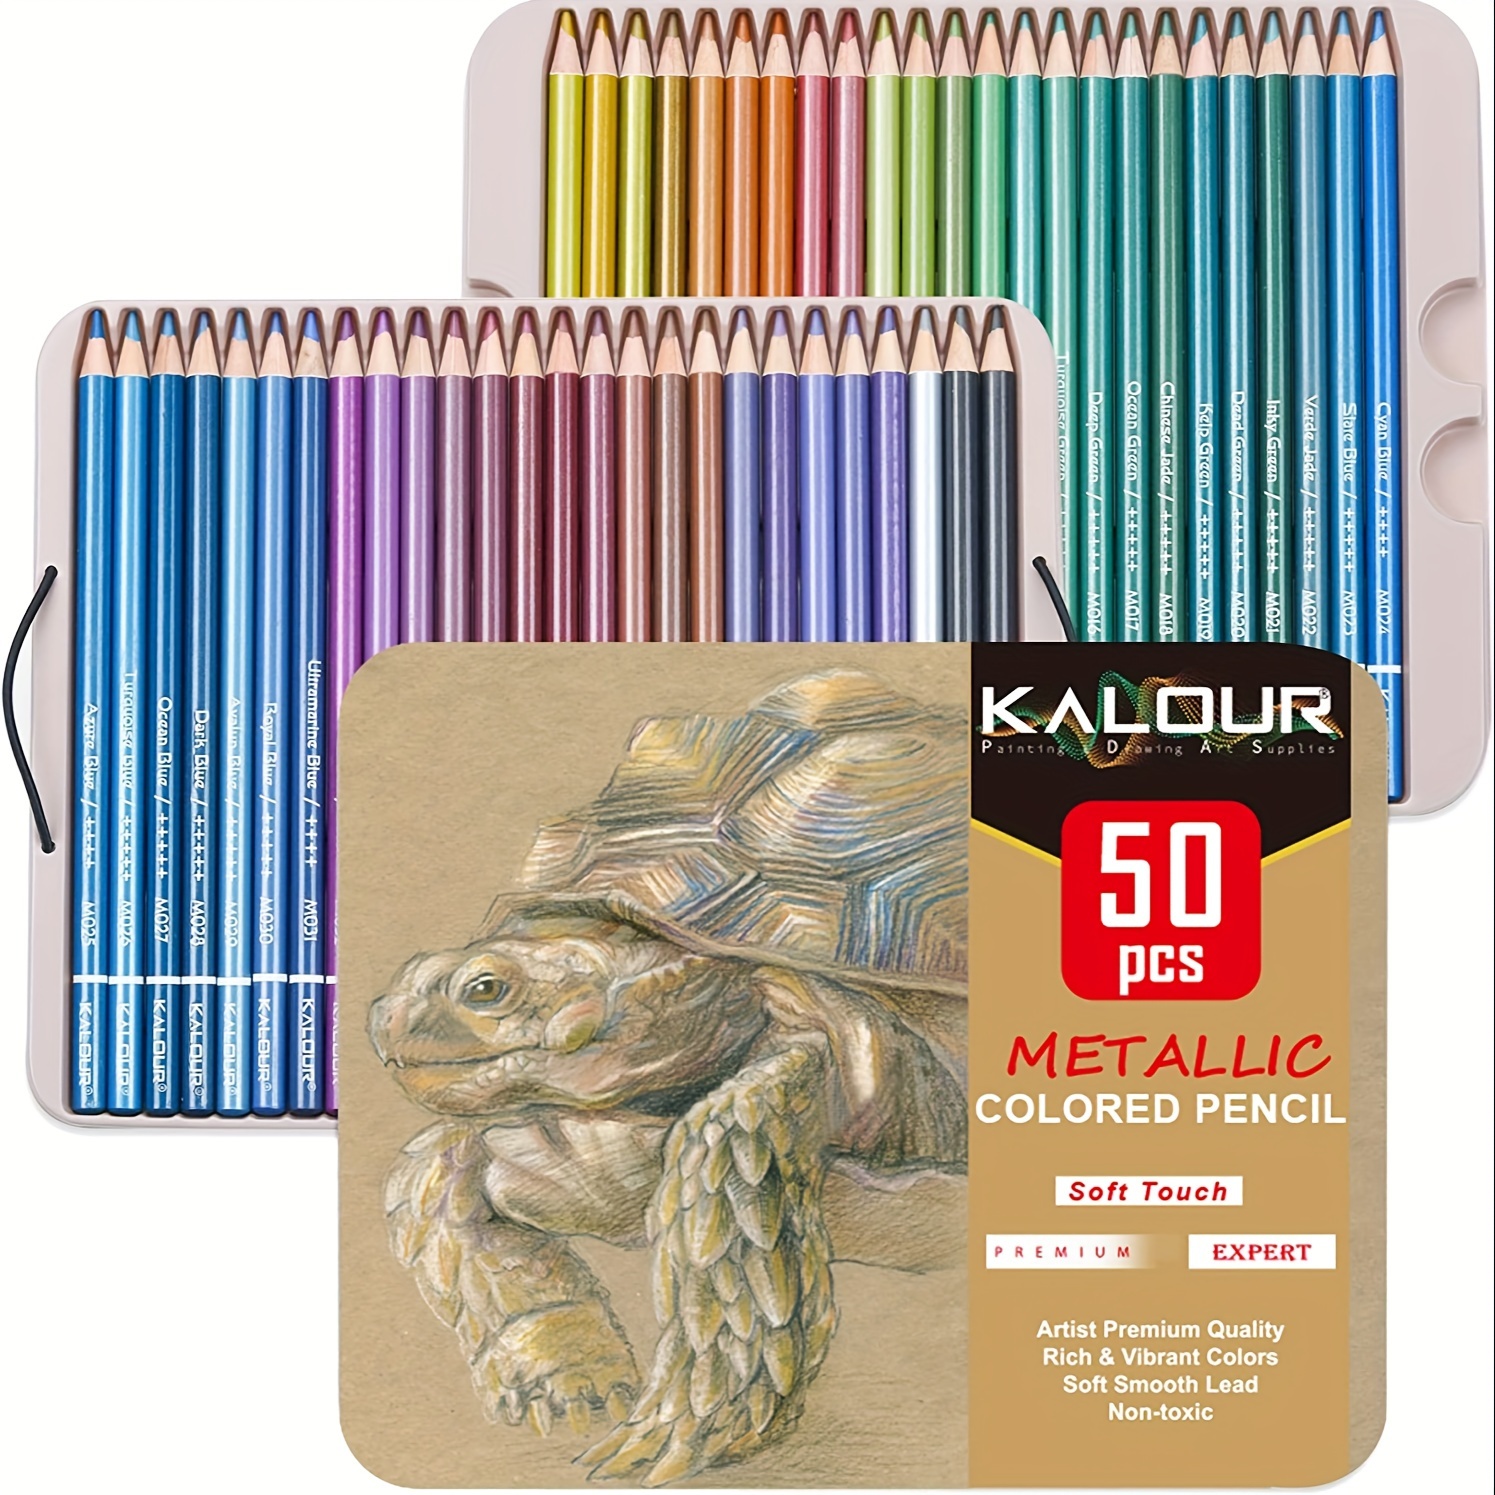  Soucolor 72-Color Colored Pencils for Coloring Books, Soft  Core, Artist Sketching Drawing Pencils Art Craft Supplies, Coloring Pencils  Set Gift for Adults Kids Beginners : Arts, Crafts & Sewing